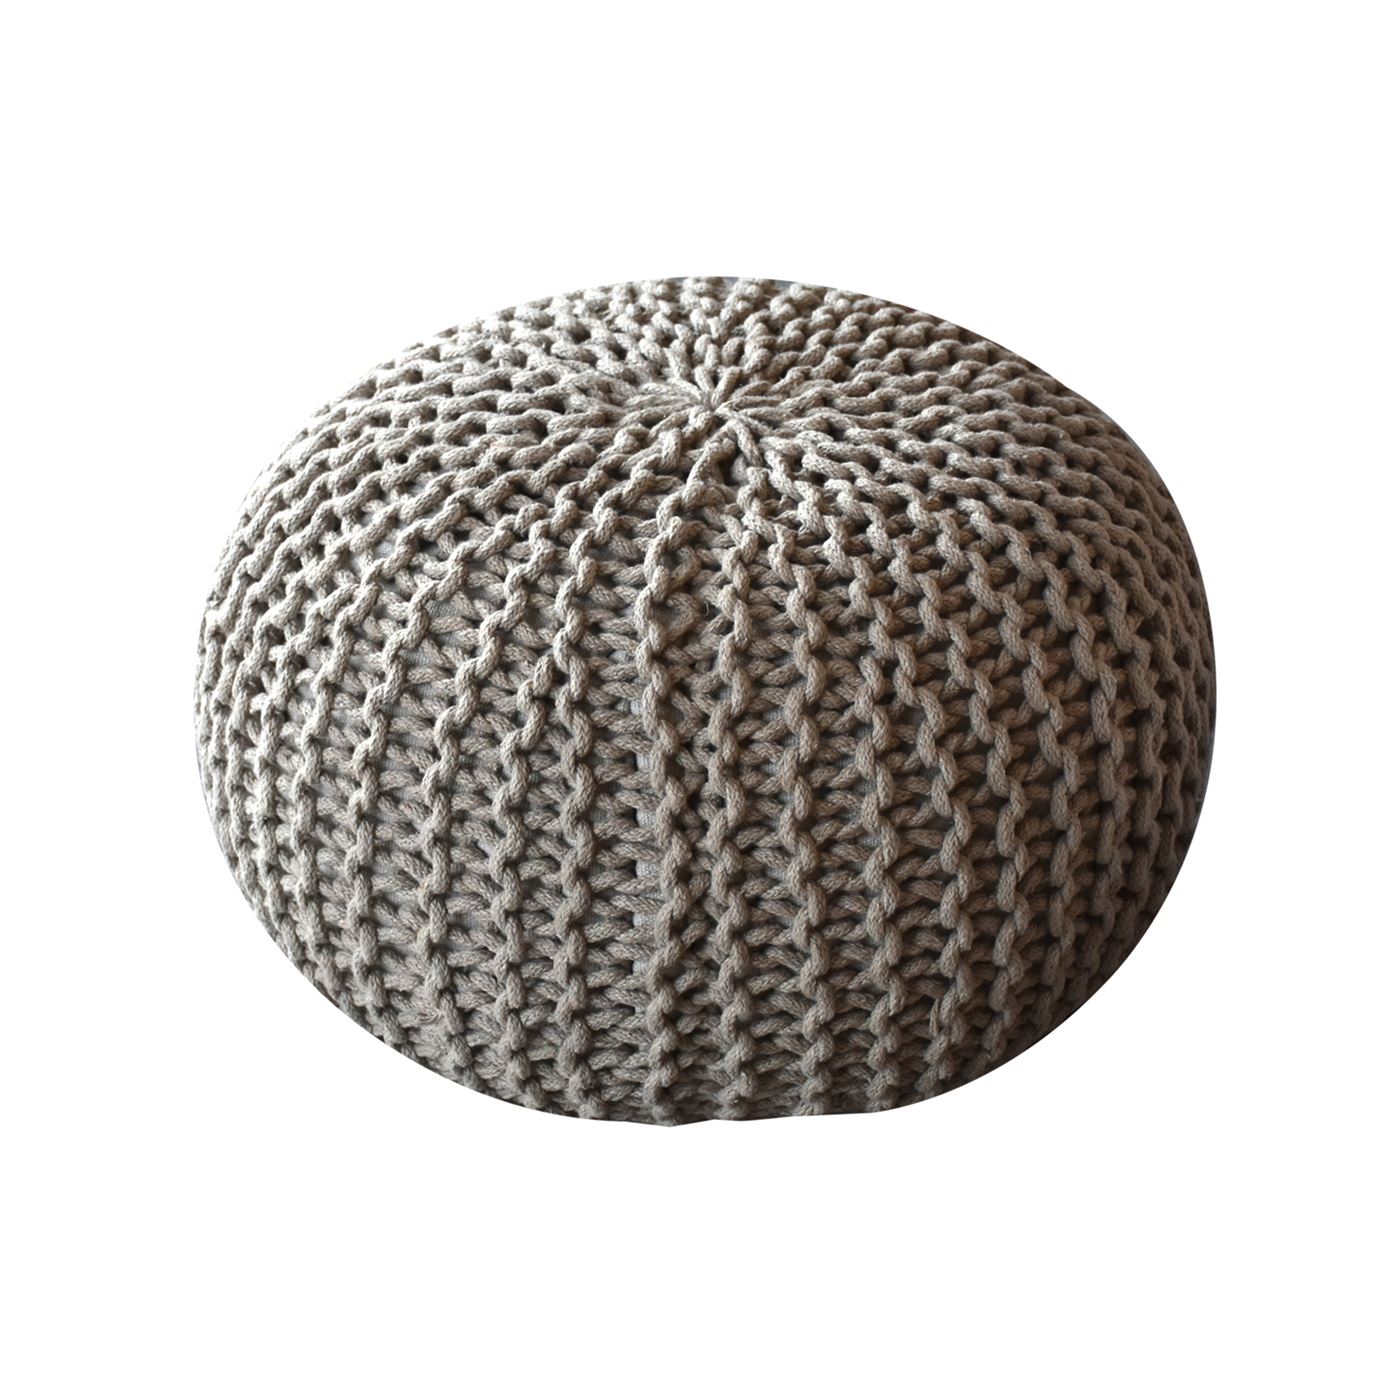 Moro Round Pouf, Cotton, Beige, Hm Knitted, Flat Weave 